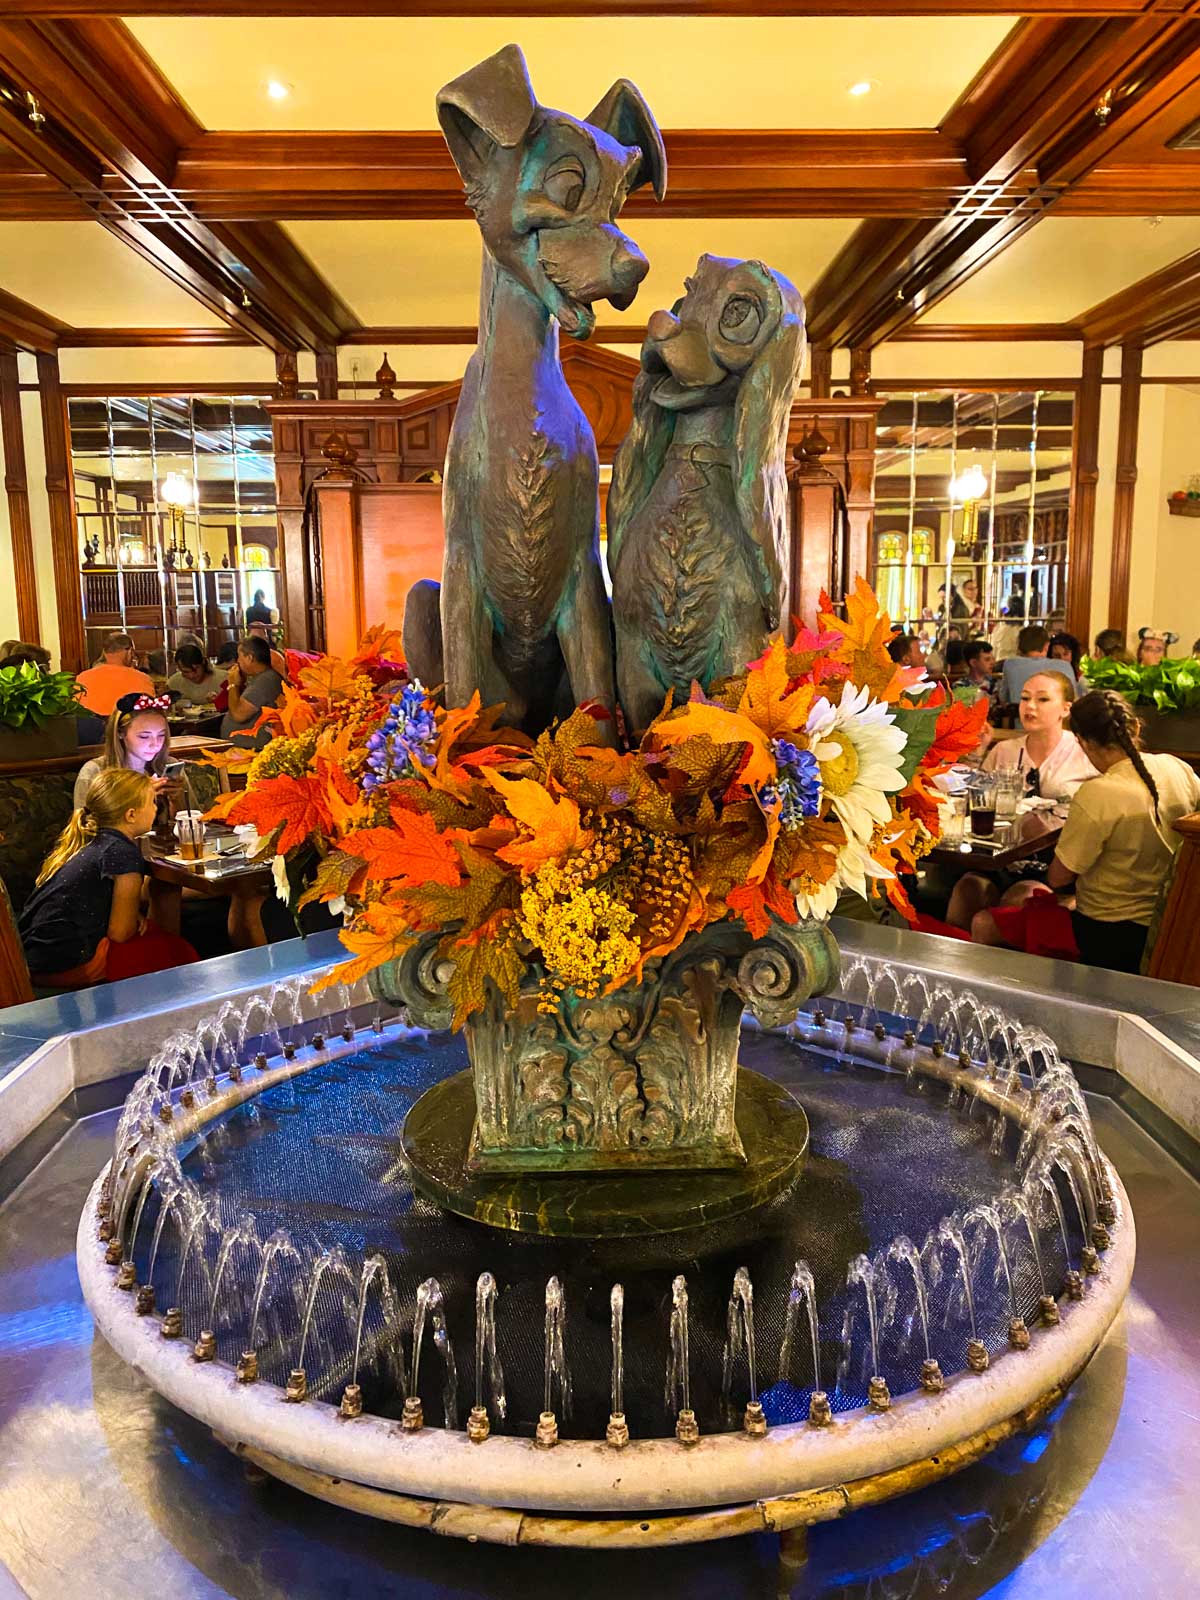 The fountain is decorated with fall flowers.